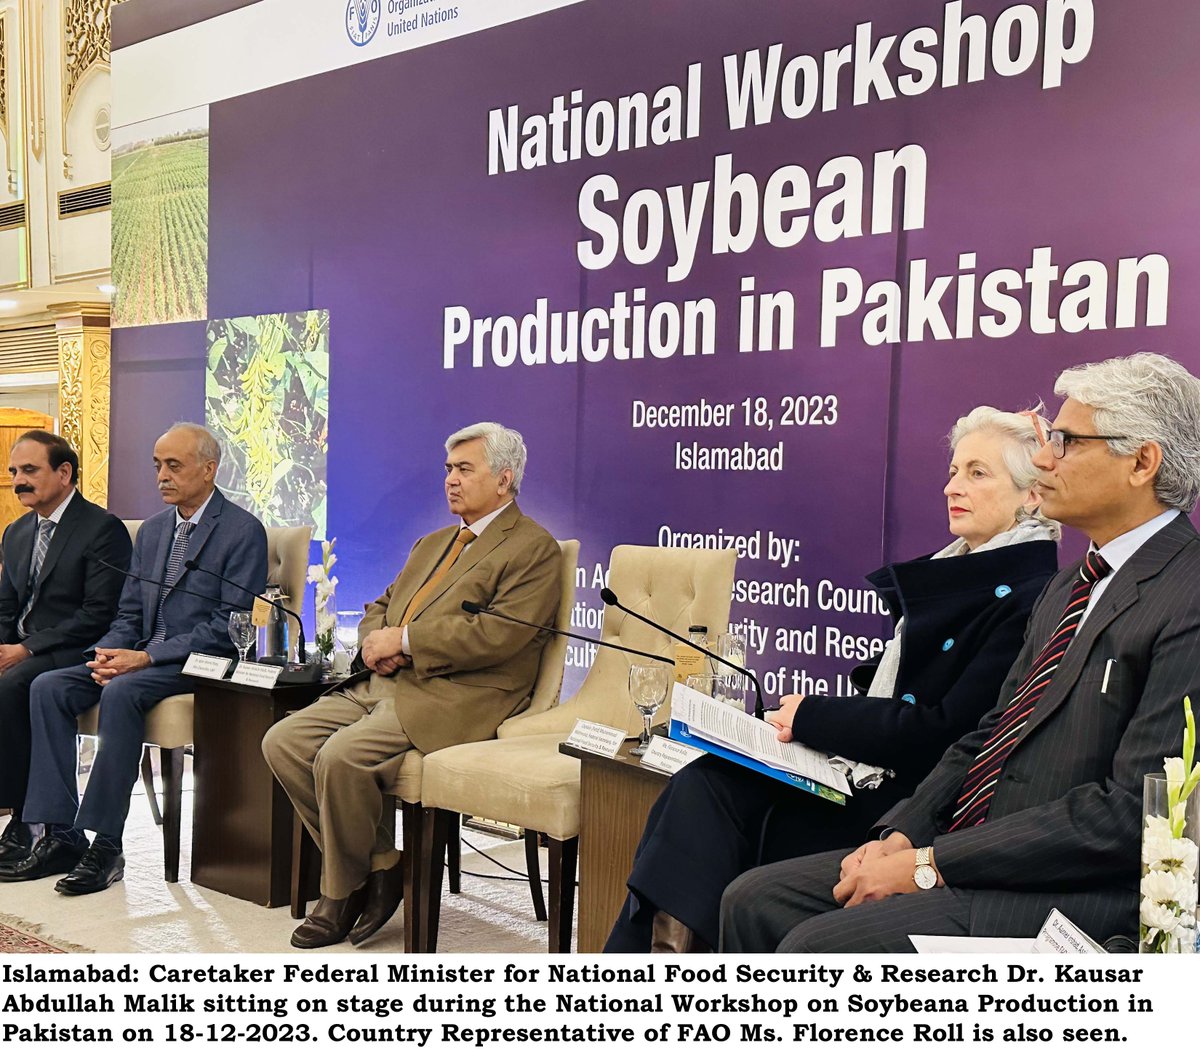 Federal Minister for National Food Security & Research Dr. Kausar Abdullah Malik addressing the National Workshop on Soybean Production in Pakistan organized by Ministry of National Food Security and Research, PARC and FAO here in Islamabad.